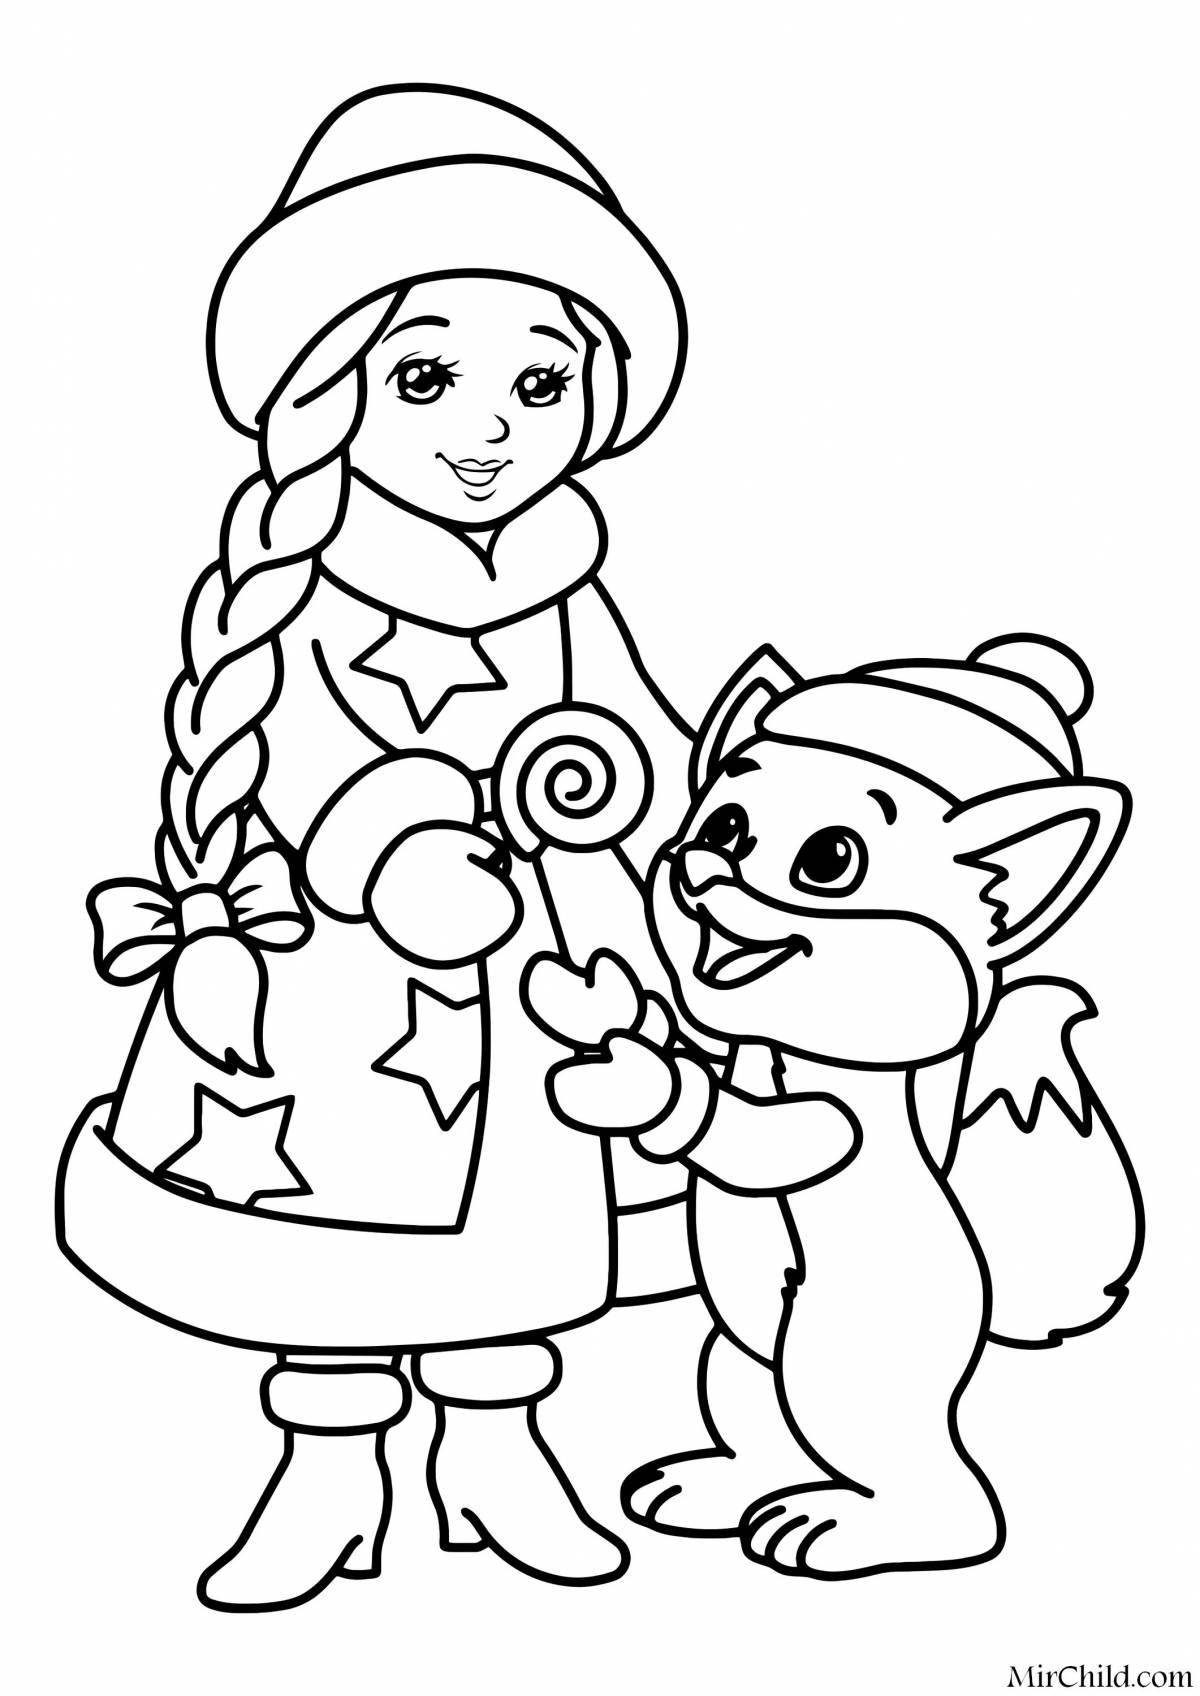 Coloring page magnanimous snow maiden